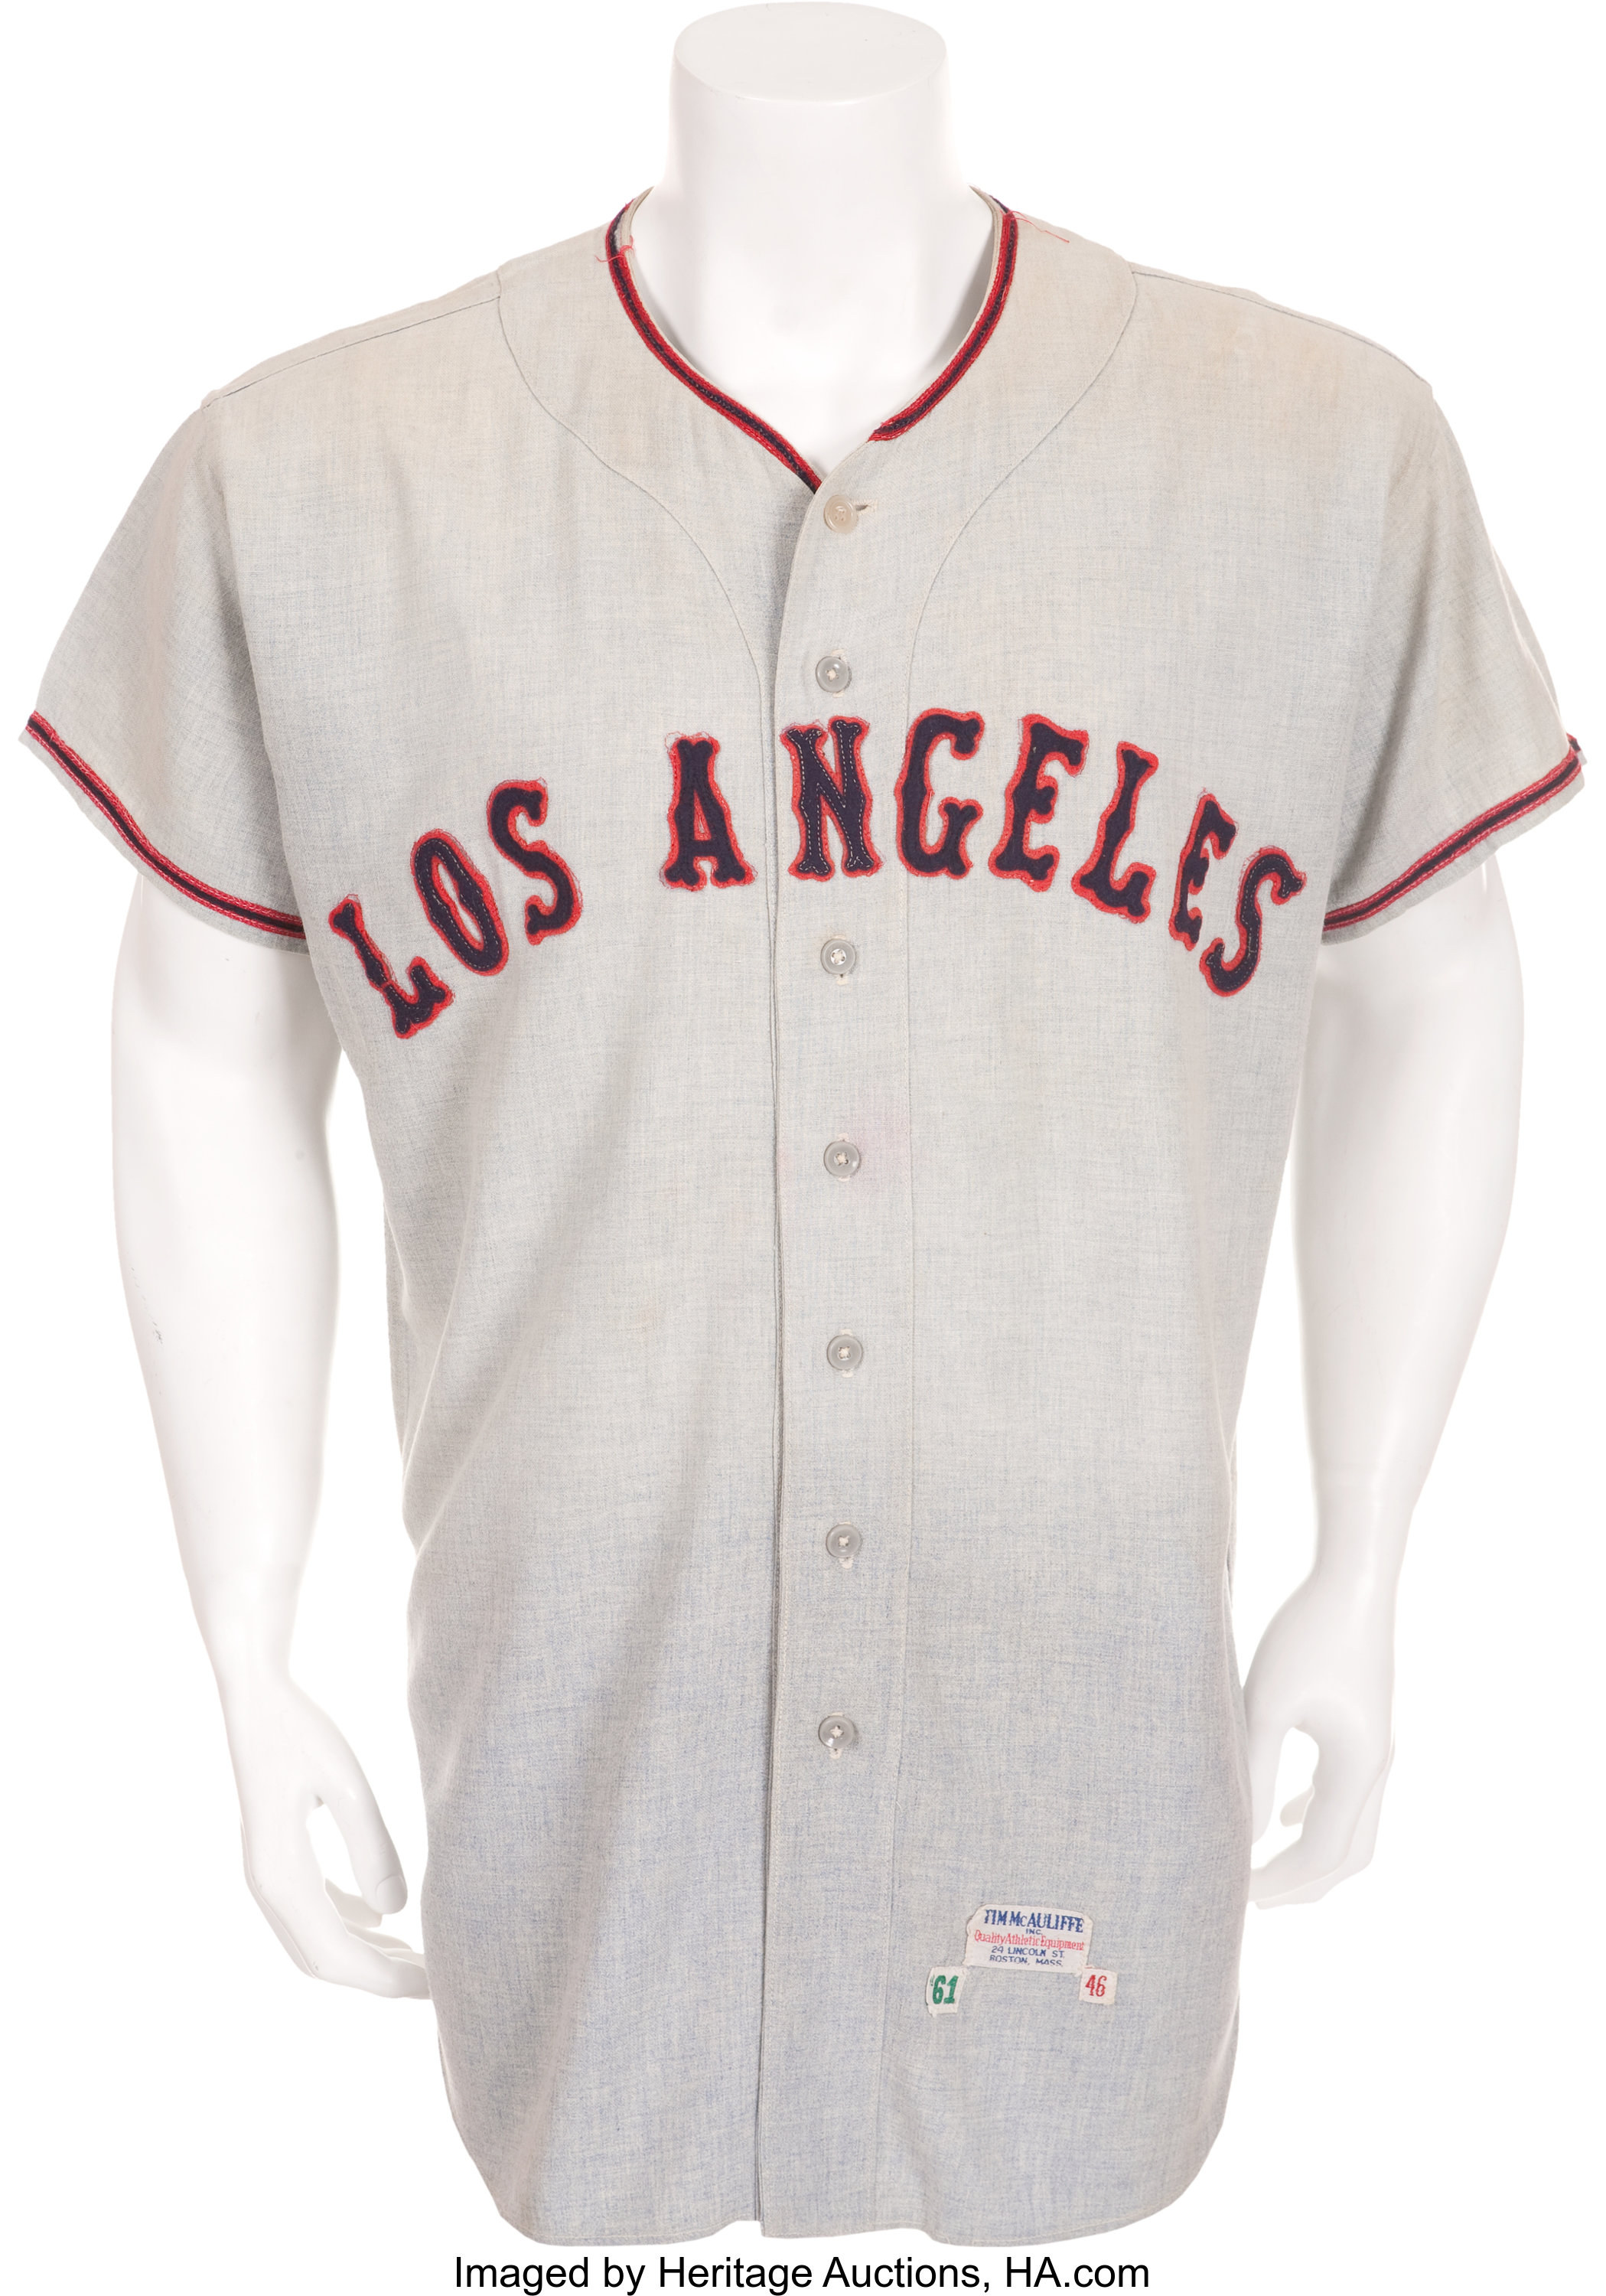 1961 California Angels Game Issued Jersey, Only Example Known